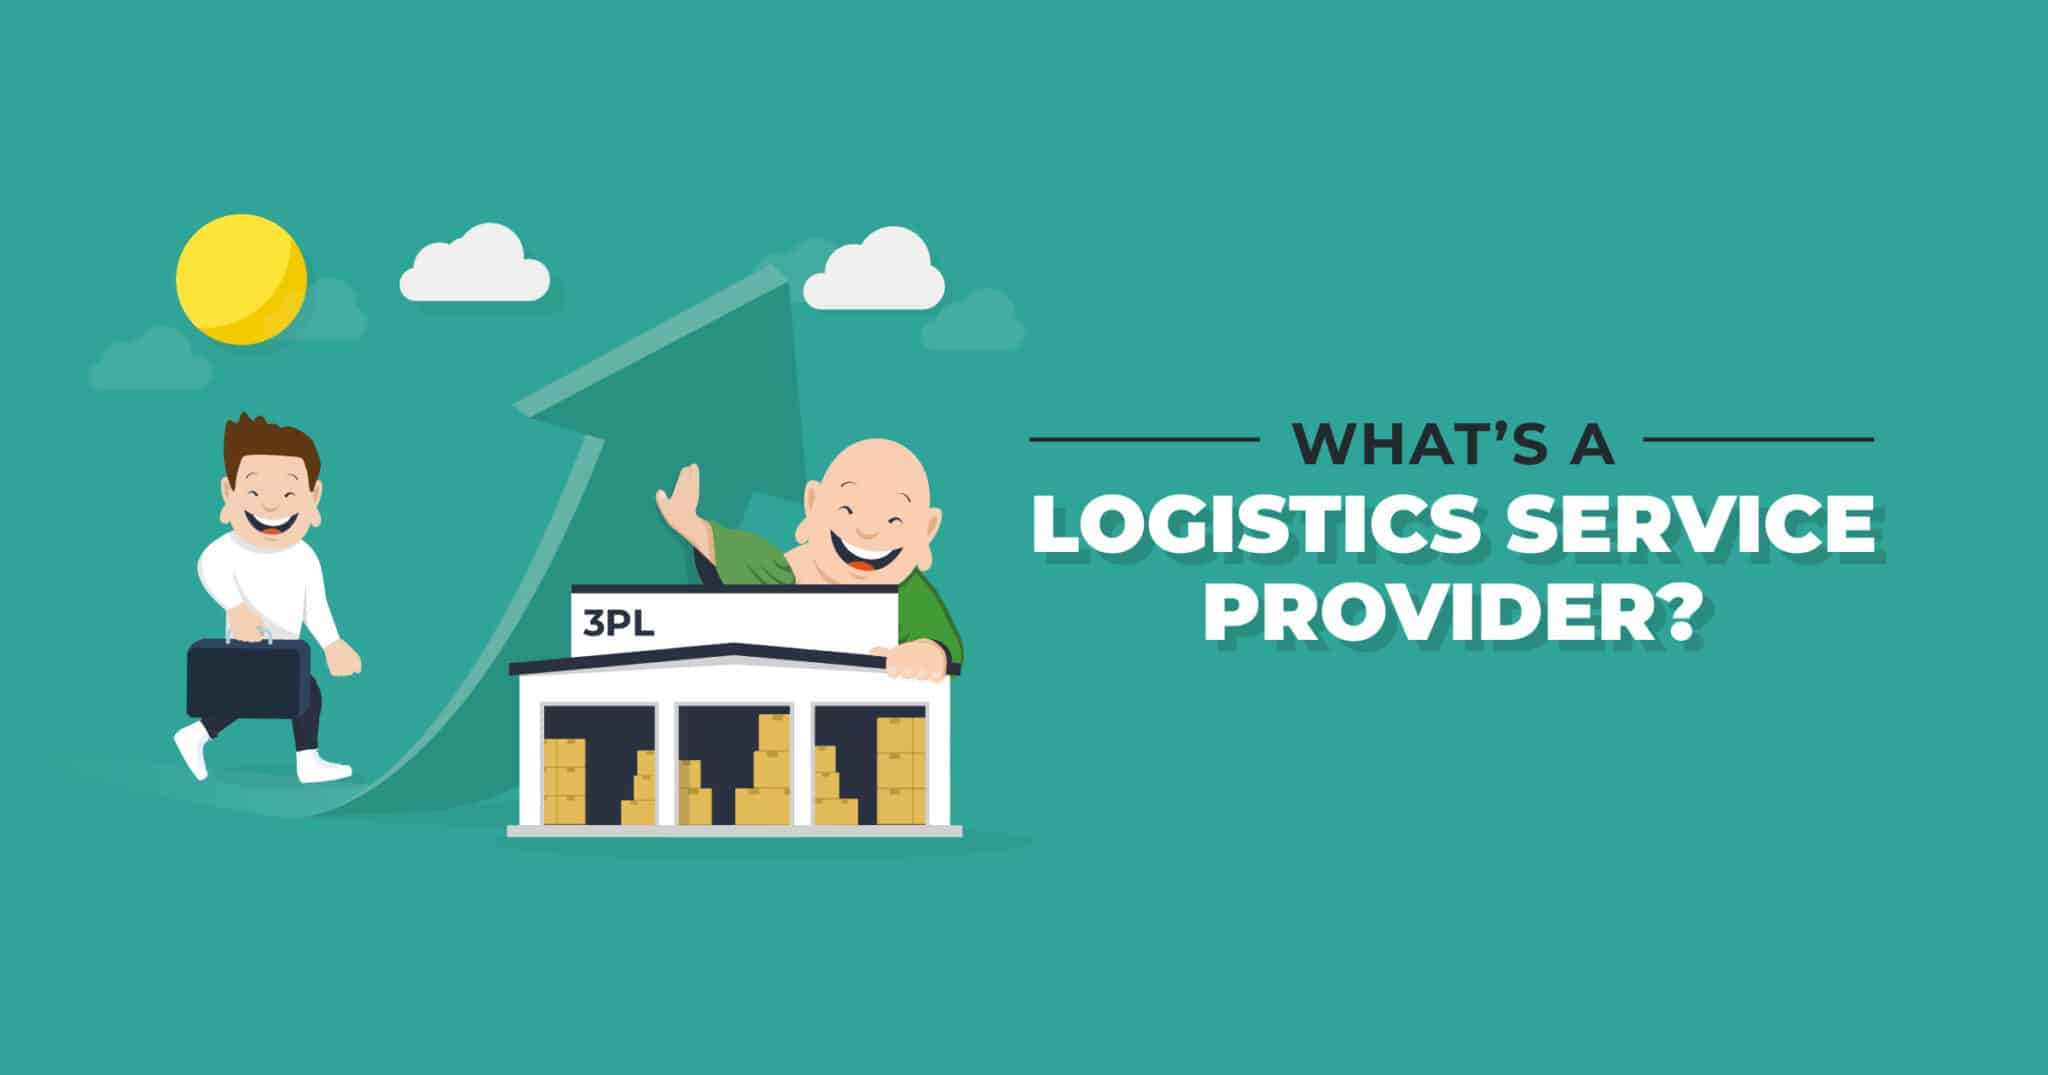 What is a Logistics Service Provider?